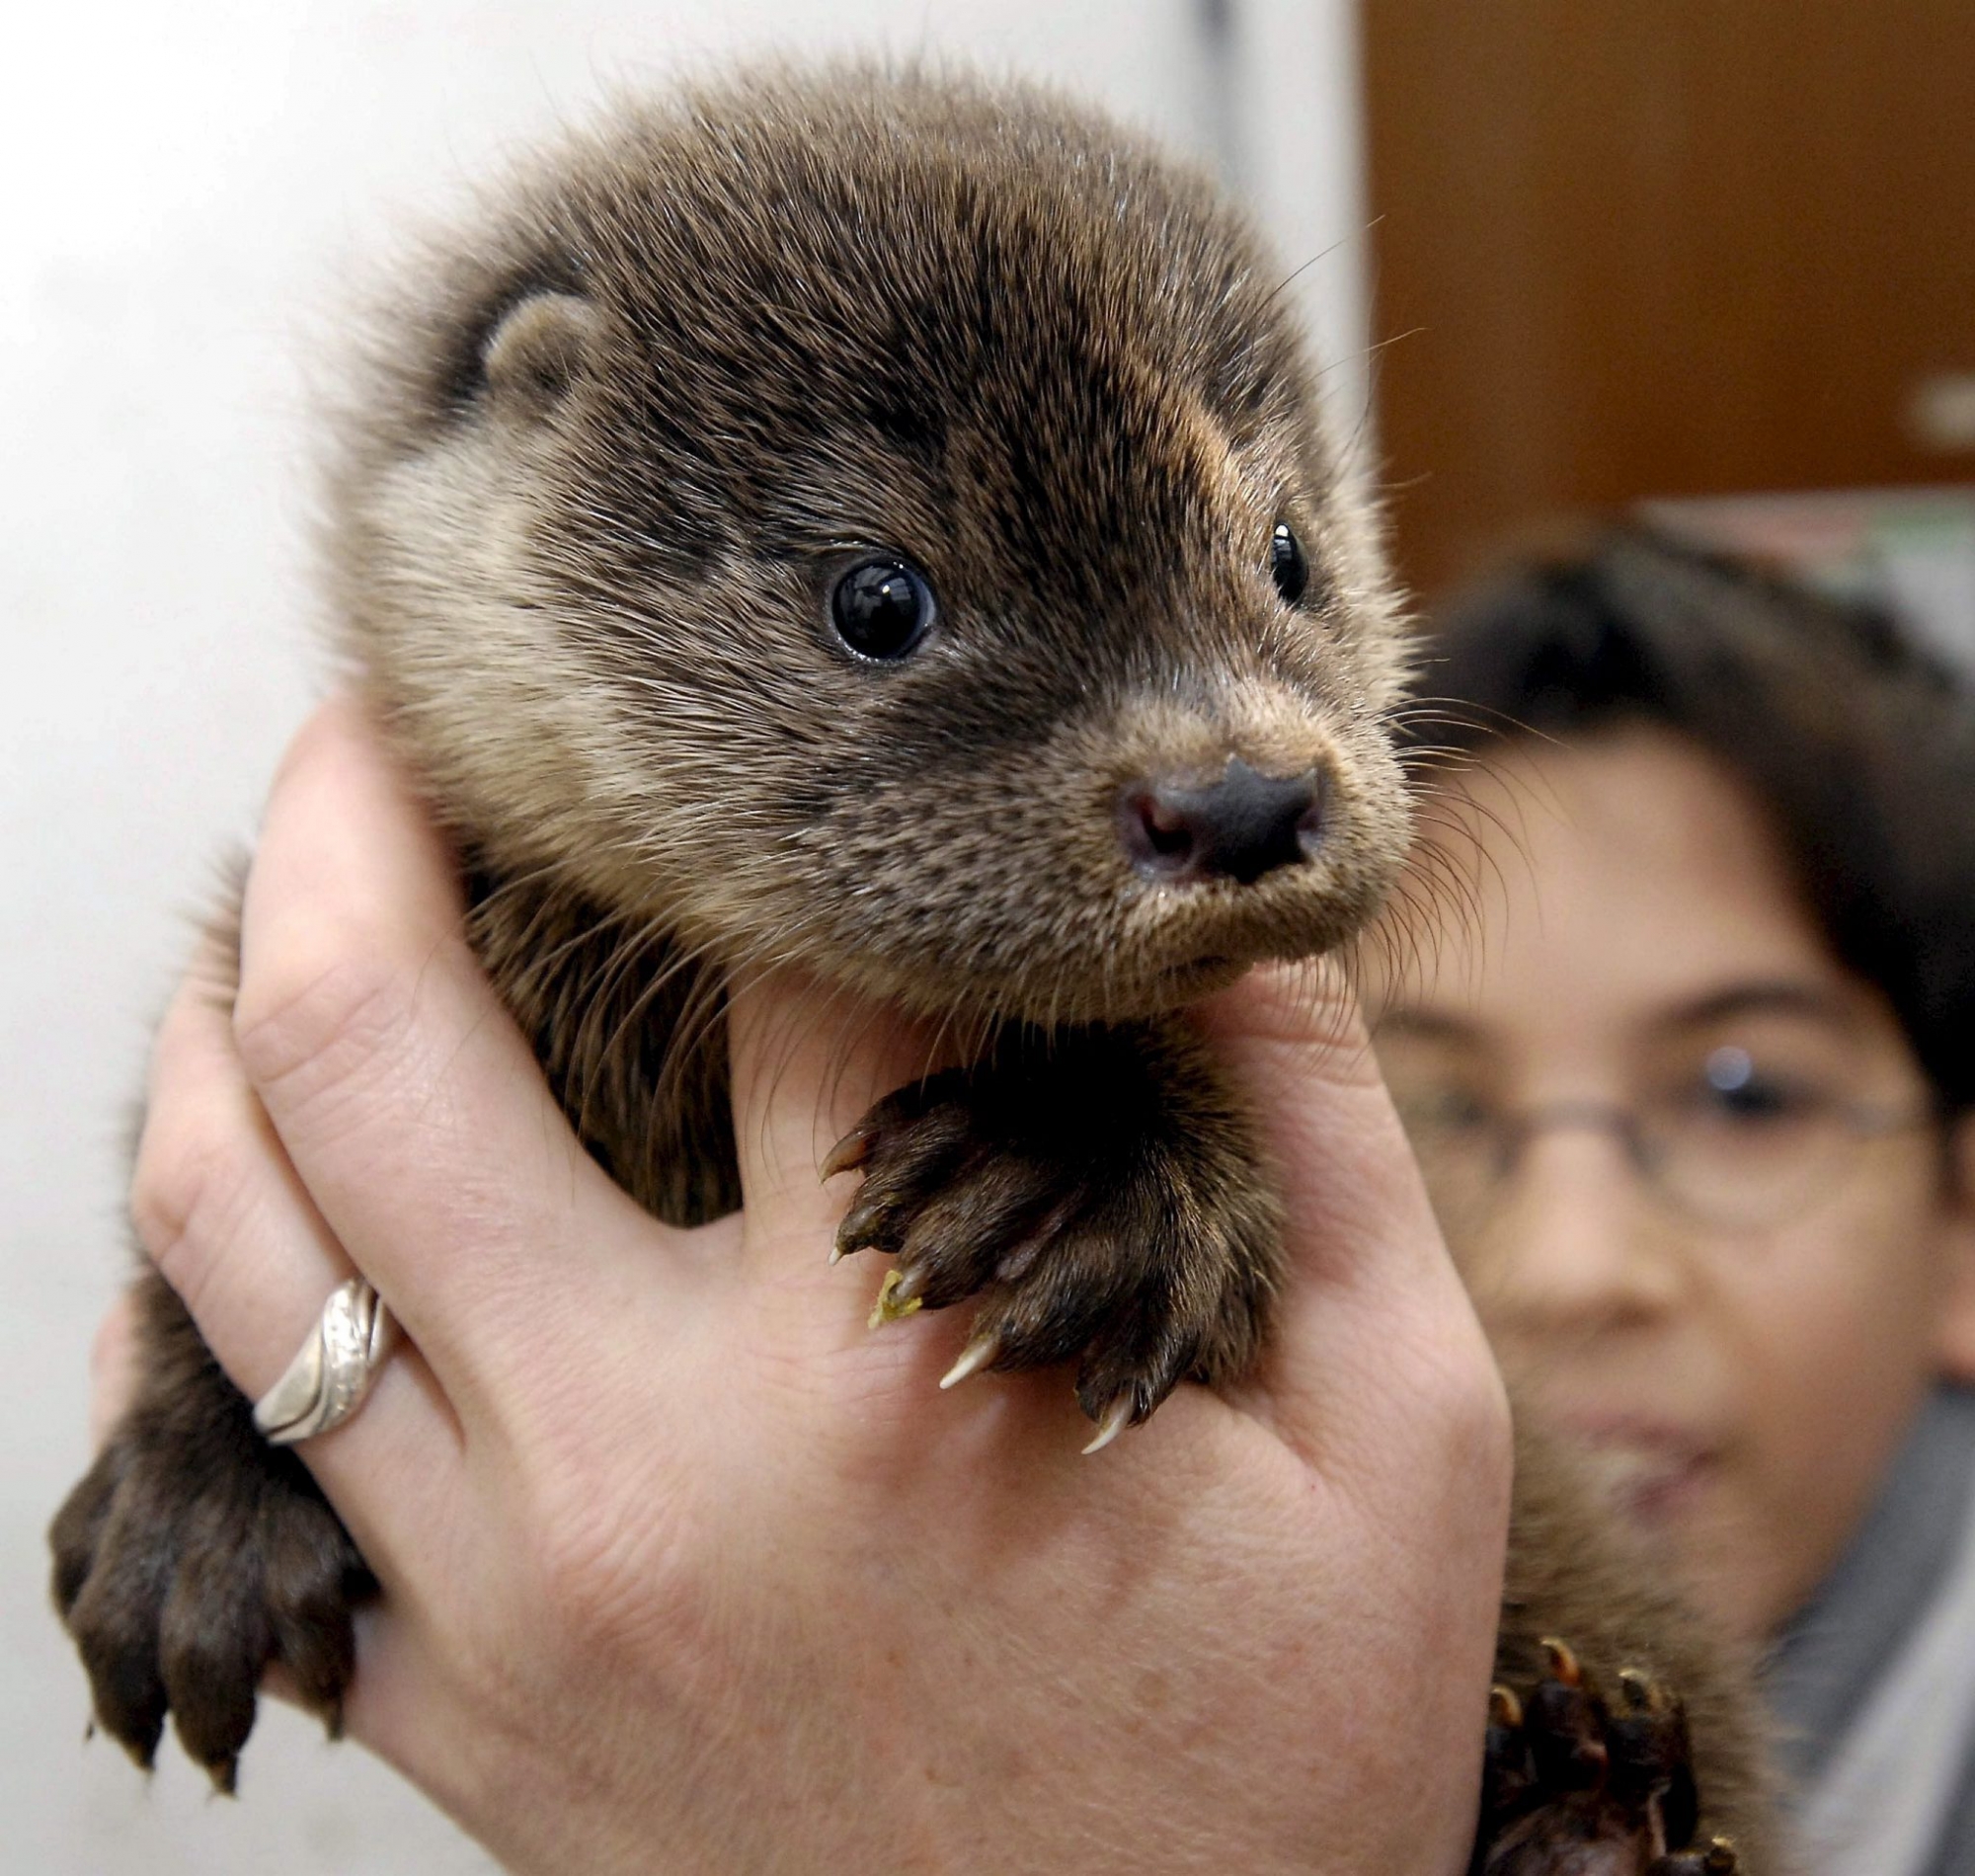 One of the three abandoned otter babies is lifted by its keeper in the Szeged Game Park  in Szeged, 170 kms southeast of Budapest, Hungary, on Saturday, 13 January 2007. The local nature conservation centre will take care the otter babies for a short time and later they will be released back to the nature.  EPA/GYOERGY NEMET HUNGARY OUT HUNGARY OTTER BABY